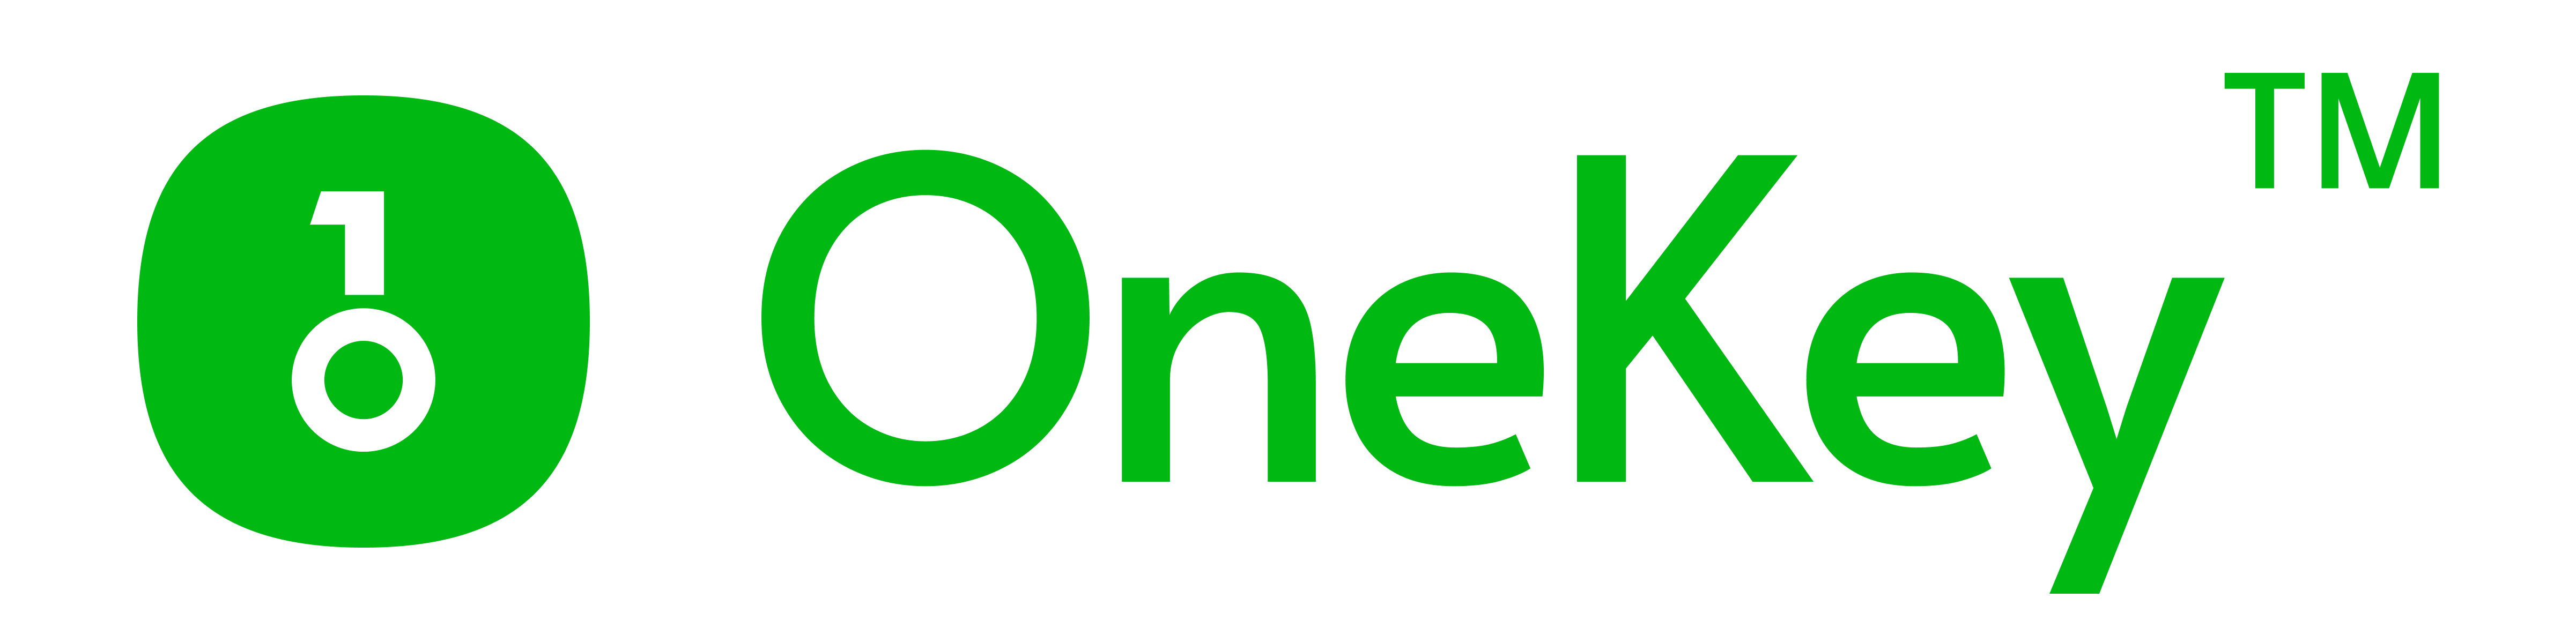 logo_with_text_green.png